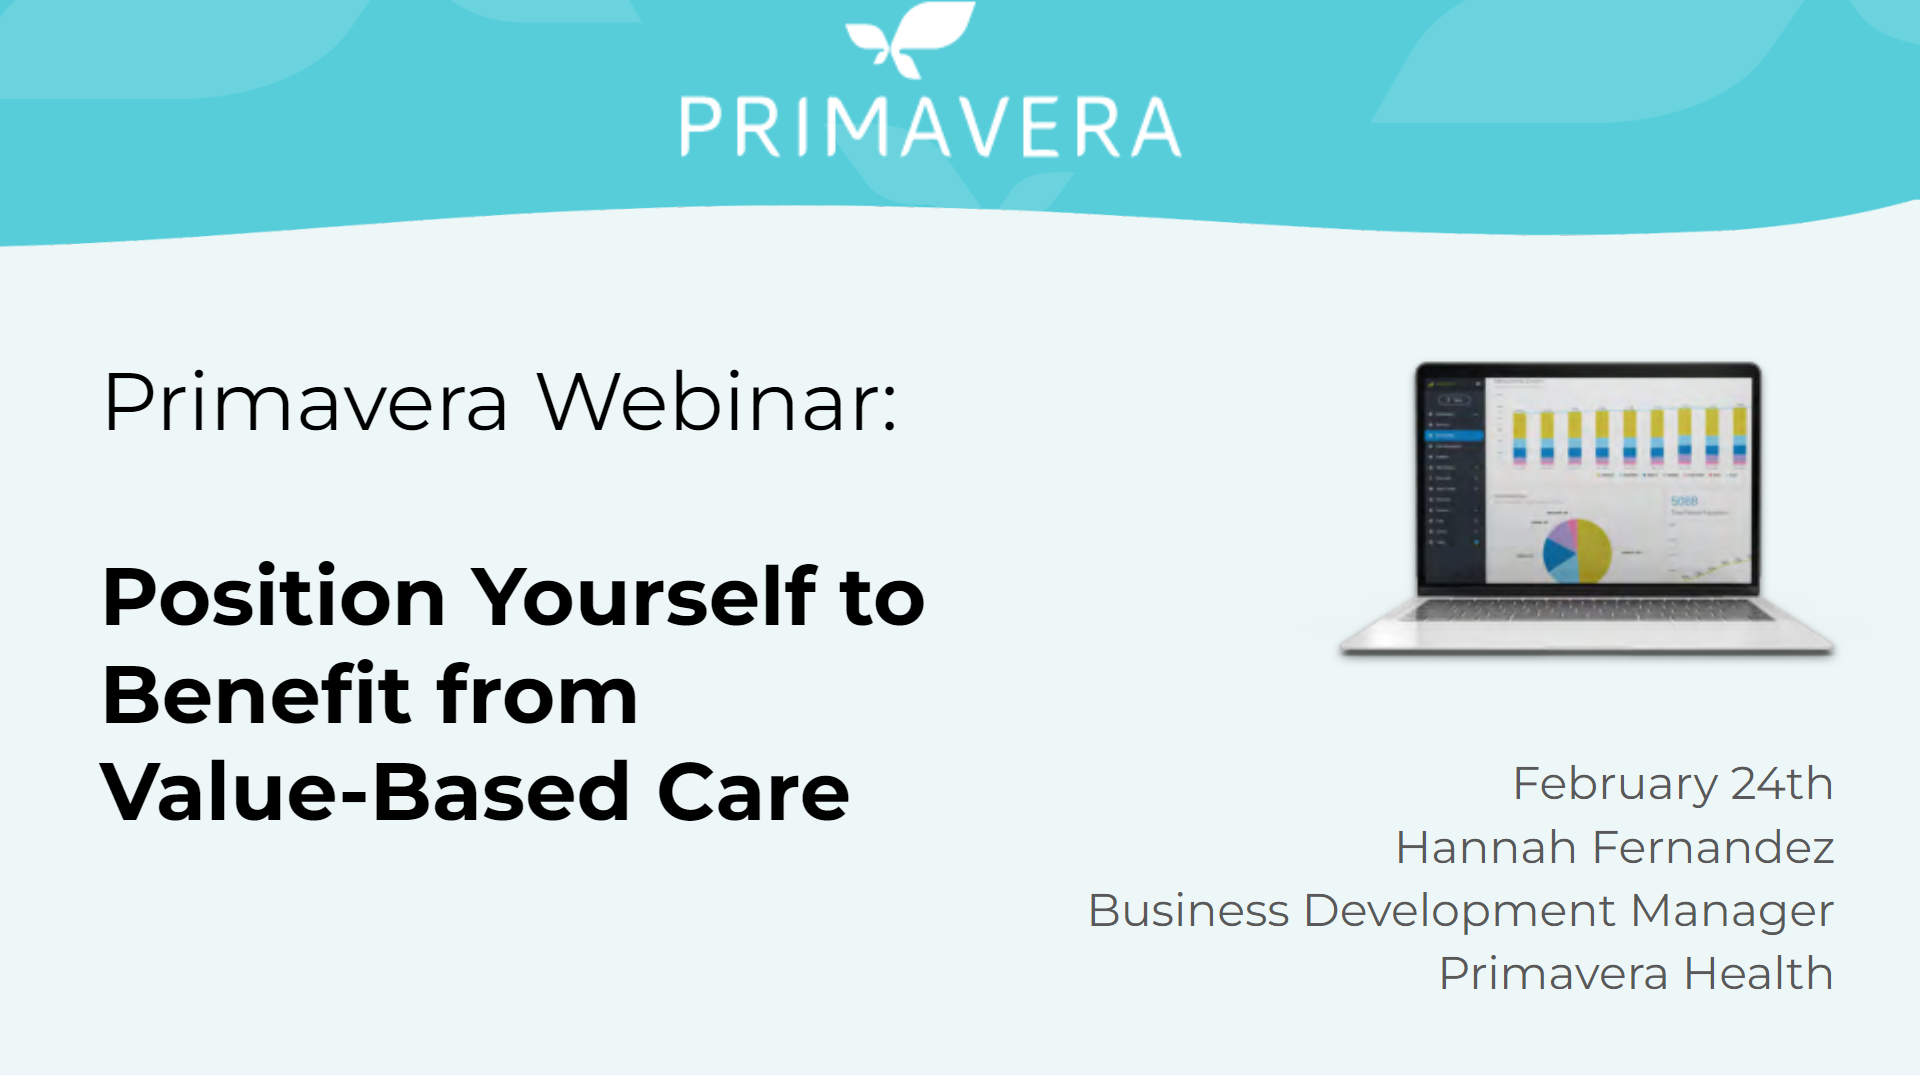 Primavera Webinar: Position Yourself to Benefit from Value-Based Care Through Data Analytics